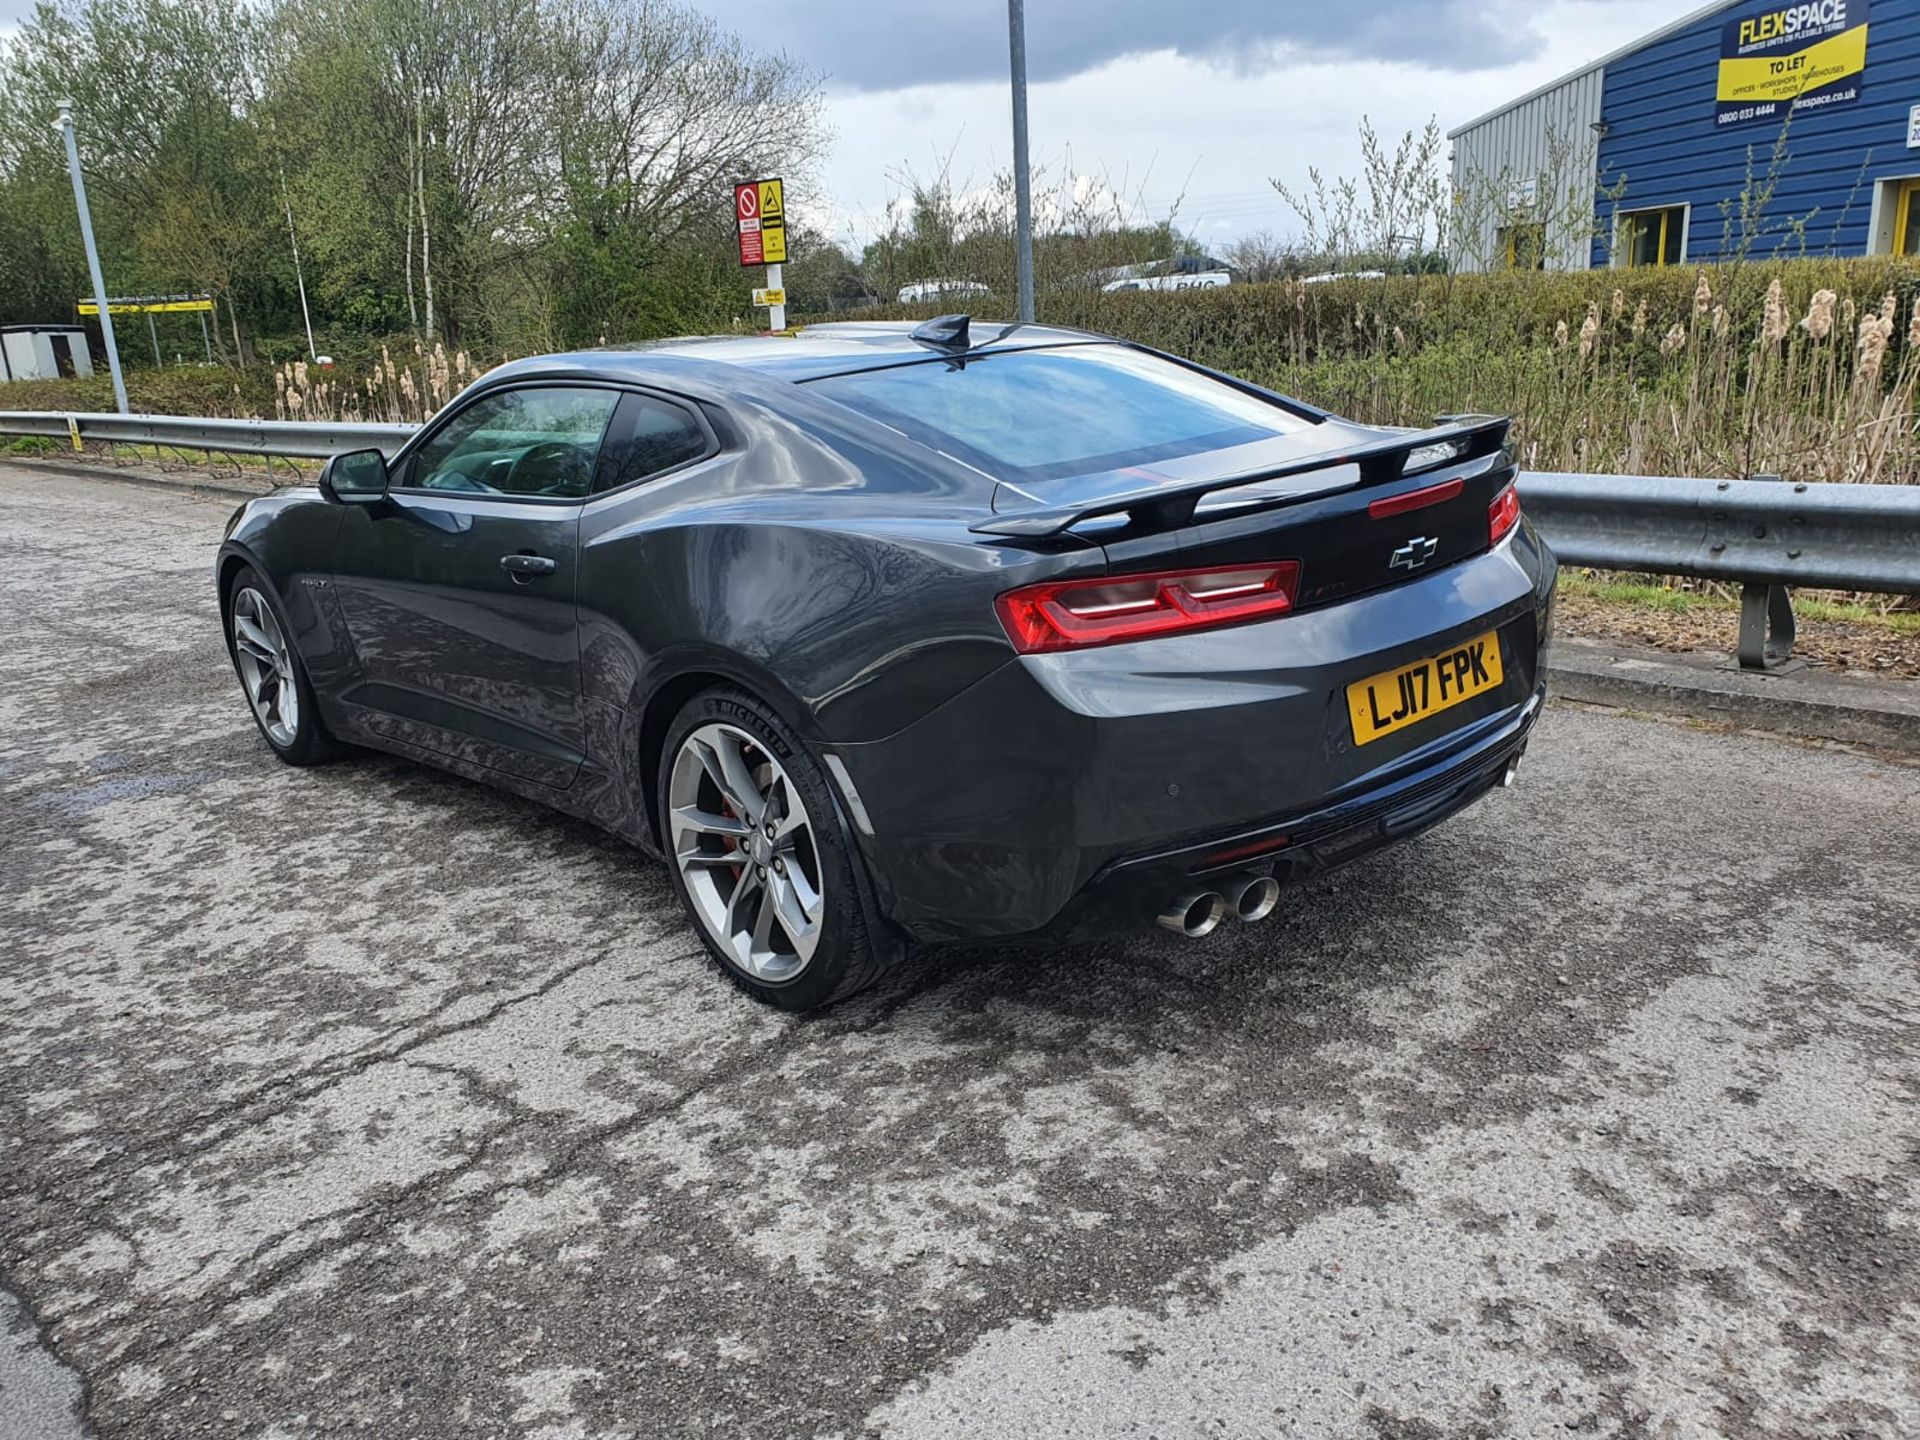 2017/17 REG CHEVROLET CAMARO V8 AUTOMATIC GREY COUPE 50th ANNIVERSARY EDITION, LHD, LOW MILEAGE - Image 8 of 43